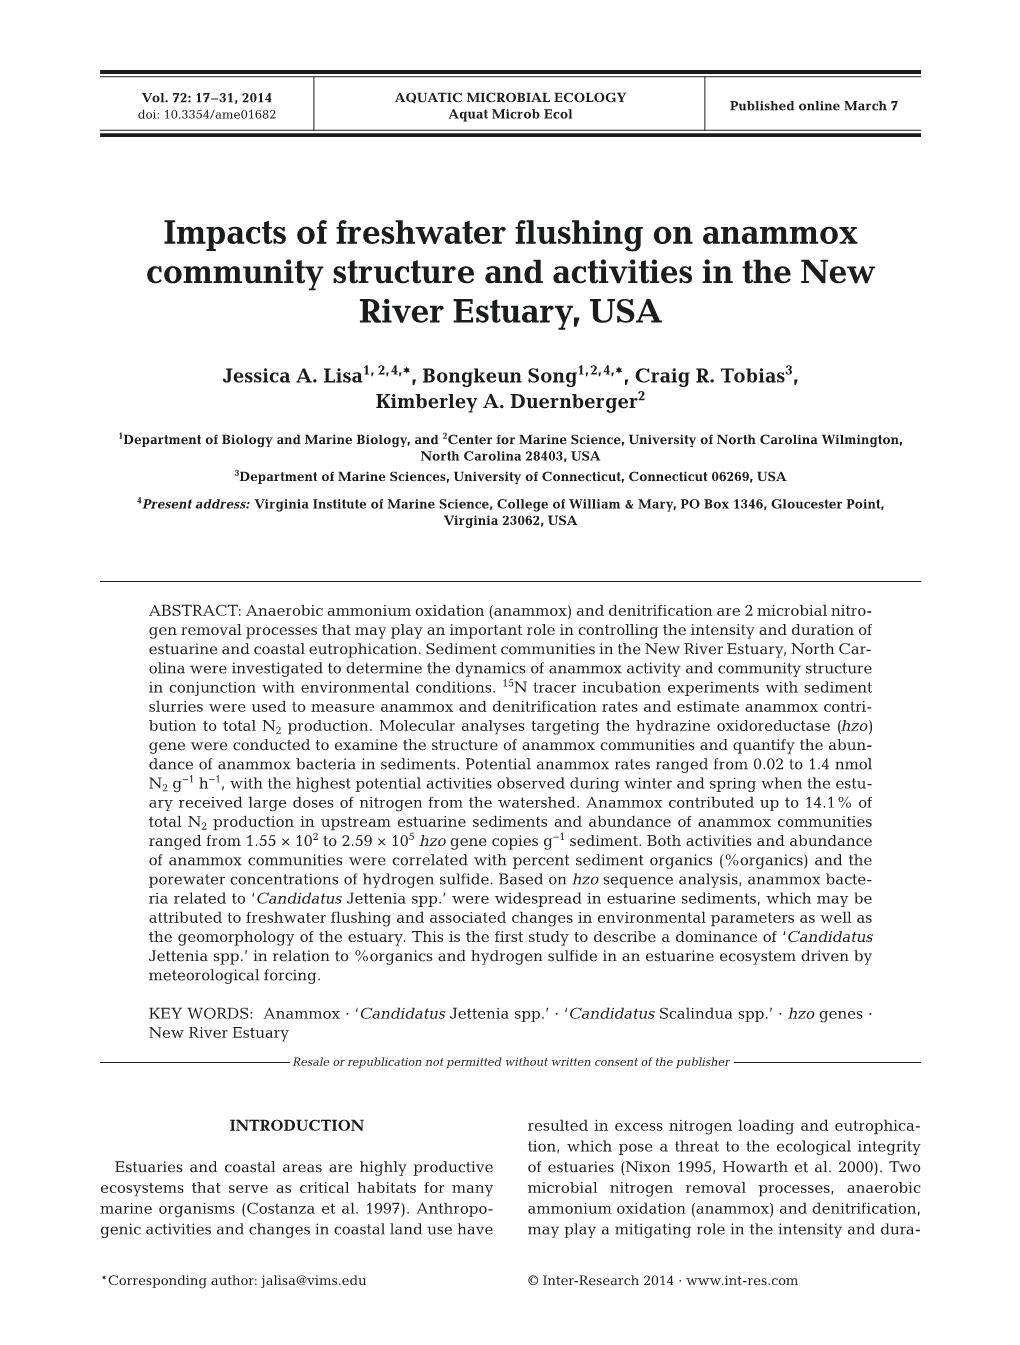 Impacts of Freshwater Flushing on Anammox Community Structure and Activities in the New River Estuary, USA